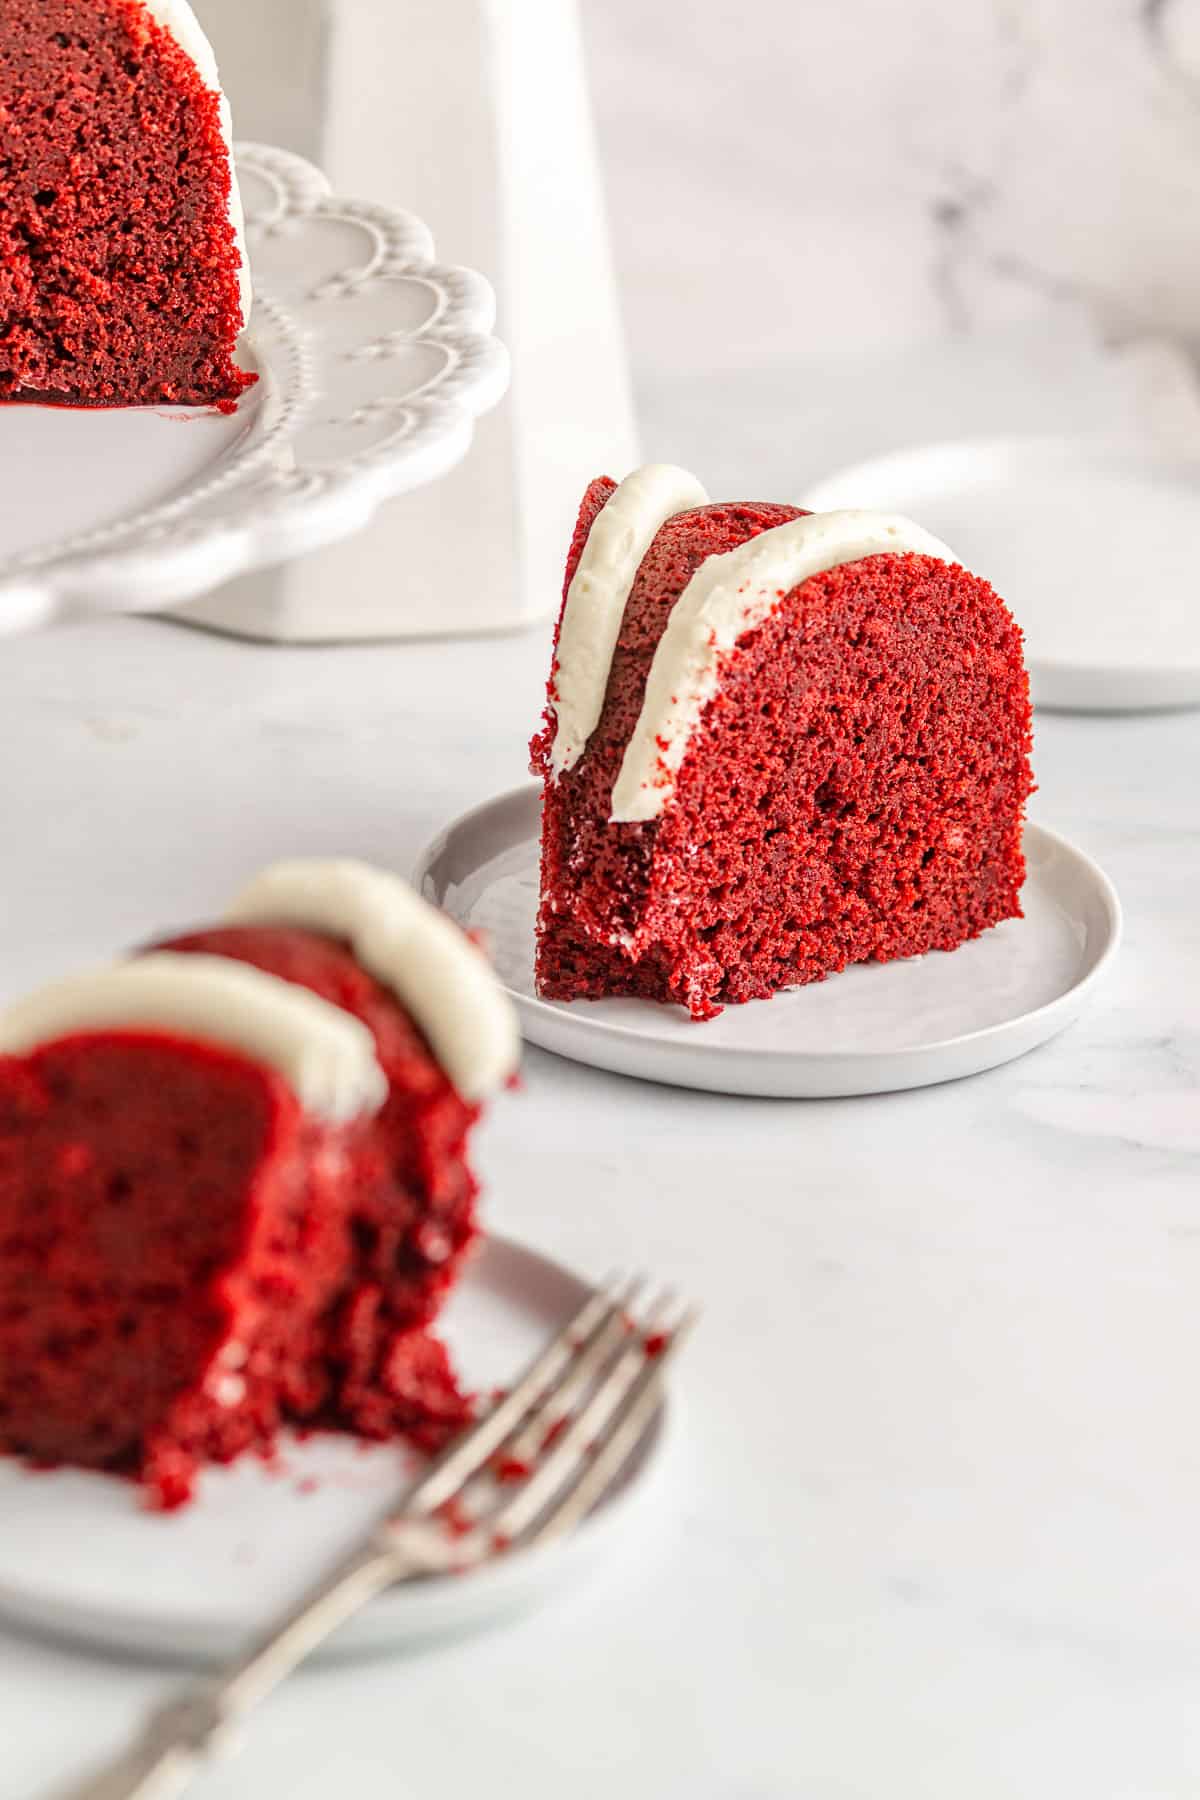 Two slices of red velvet pound cake with cream cheese frosting on white plates.